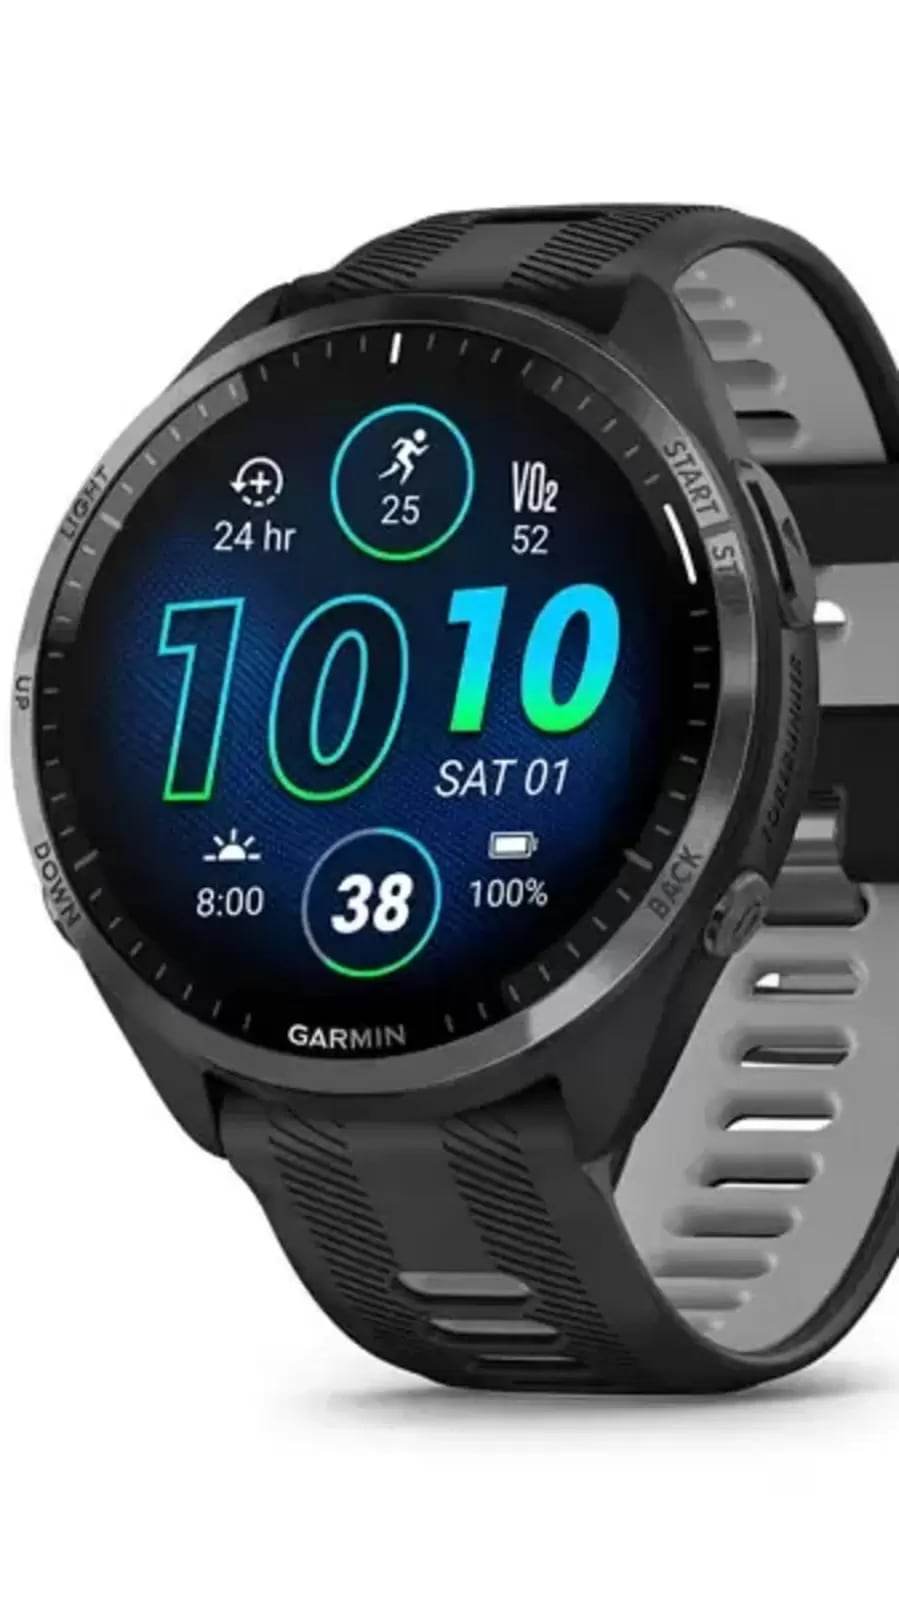 Garmin Forerunner 965, Forerunner 265 Series Smartwatches Launched In  India: Price, Features And Availability - News18